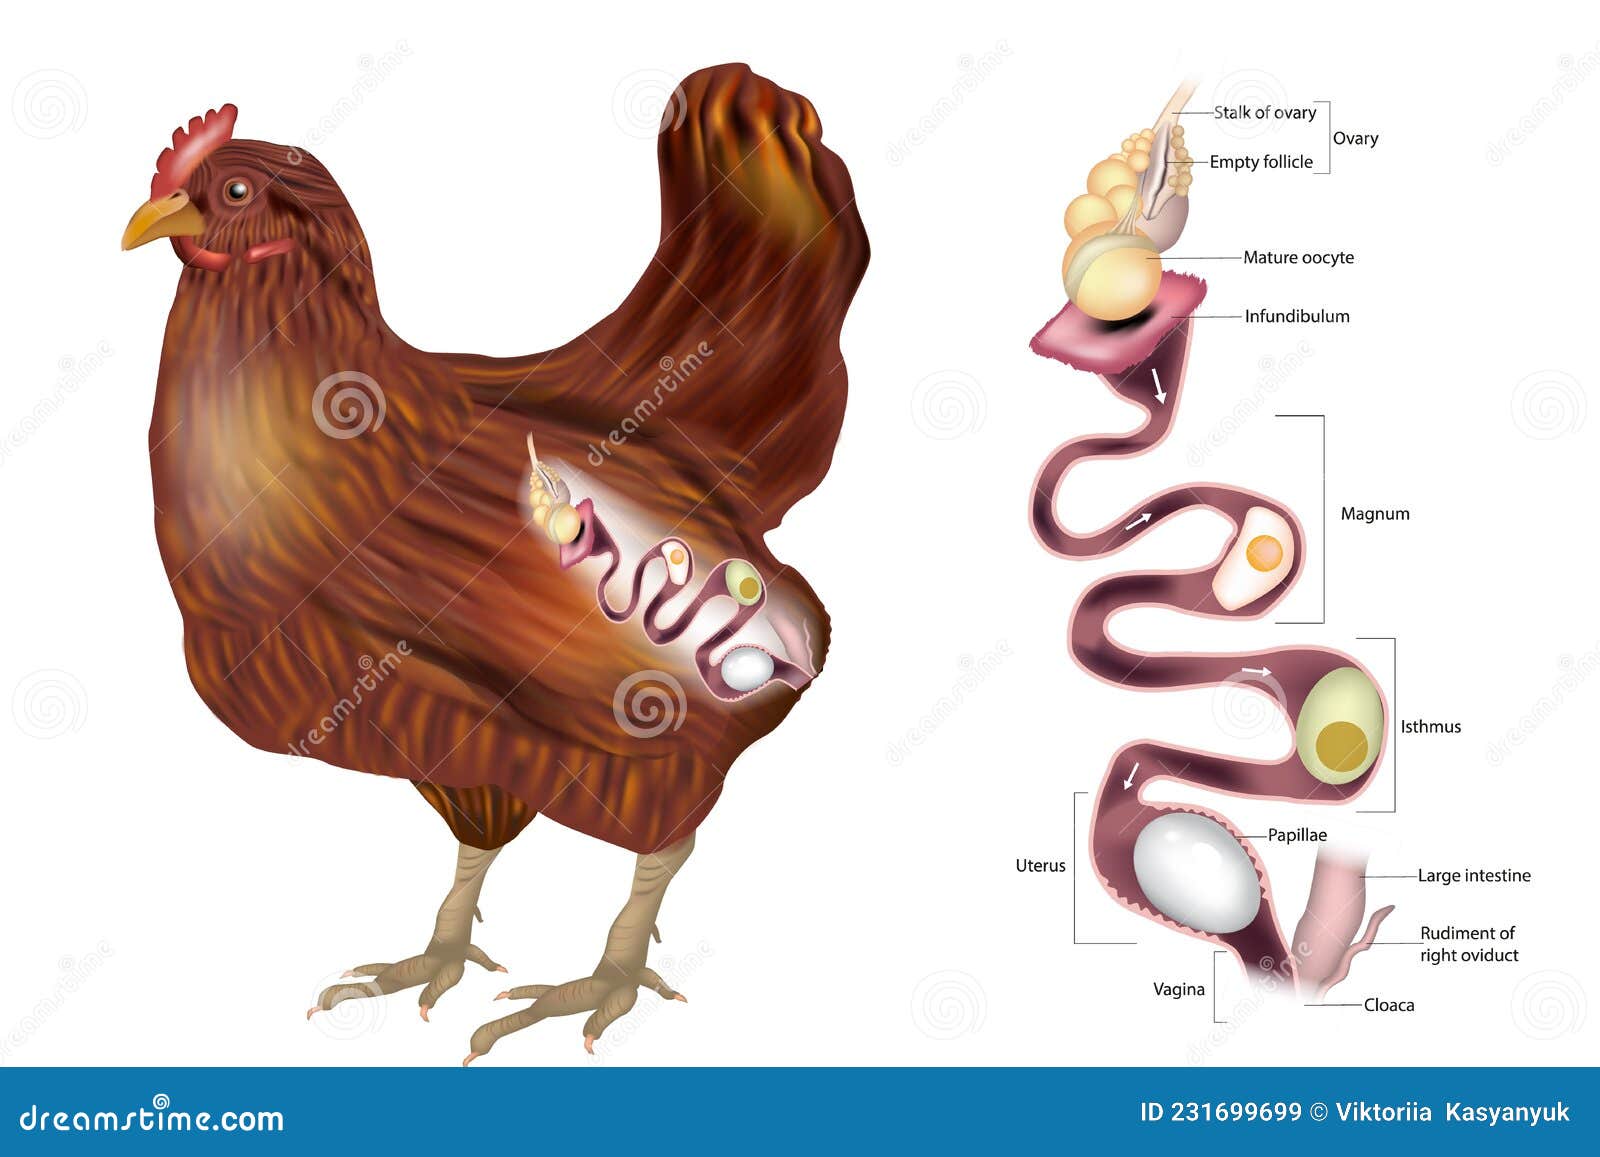 The Hen S Reproductive System Showing The Ovary And The Various Sections Of The Oviduct Chicken